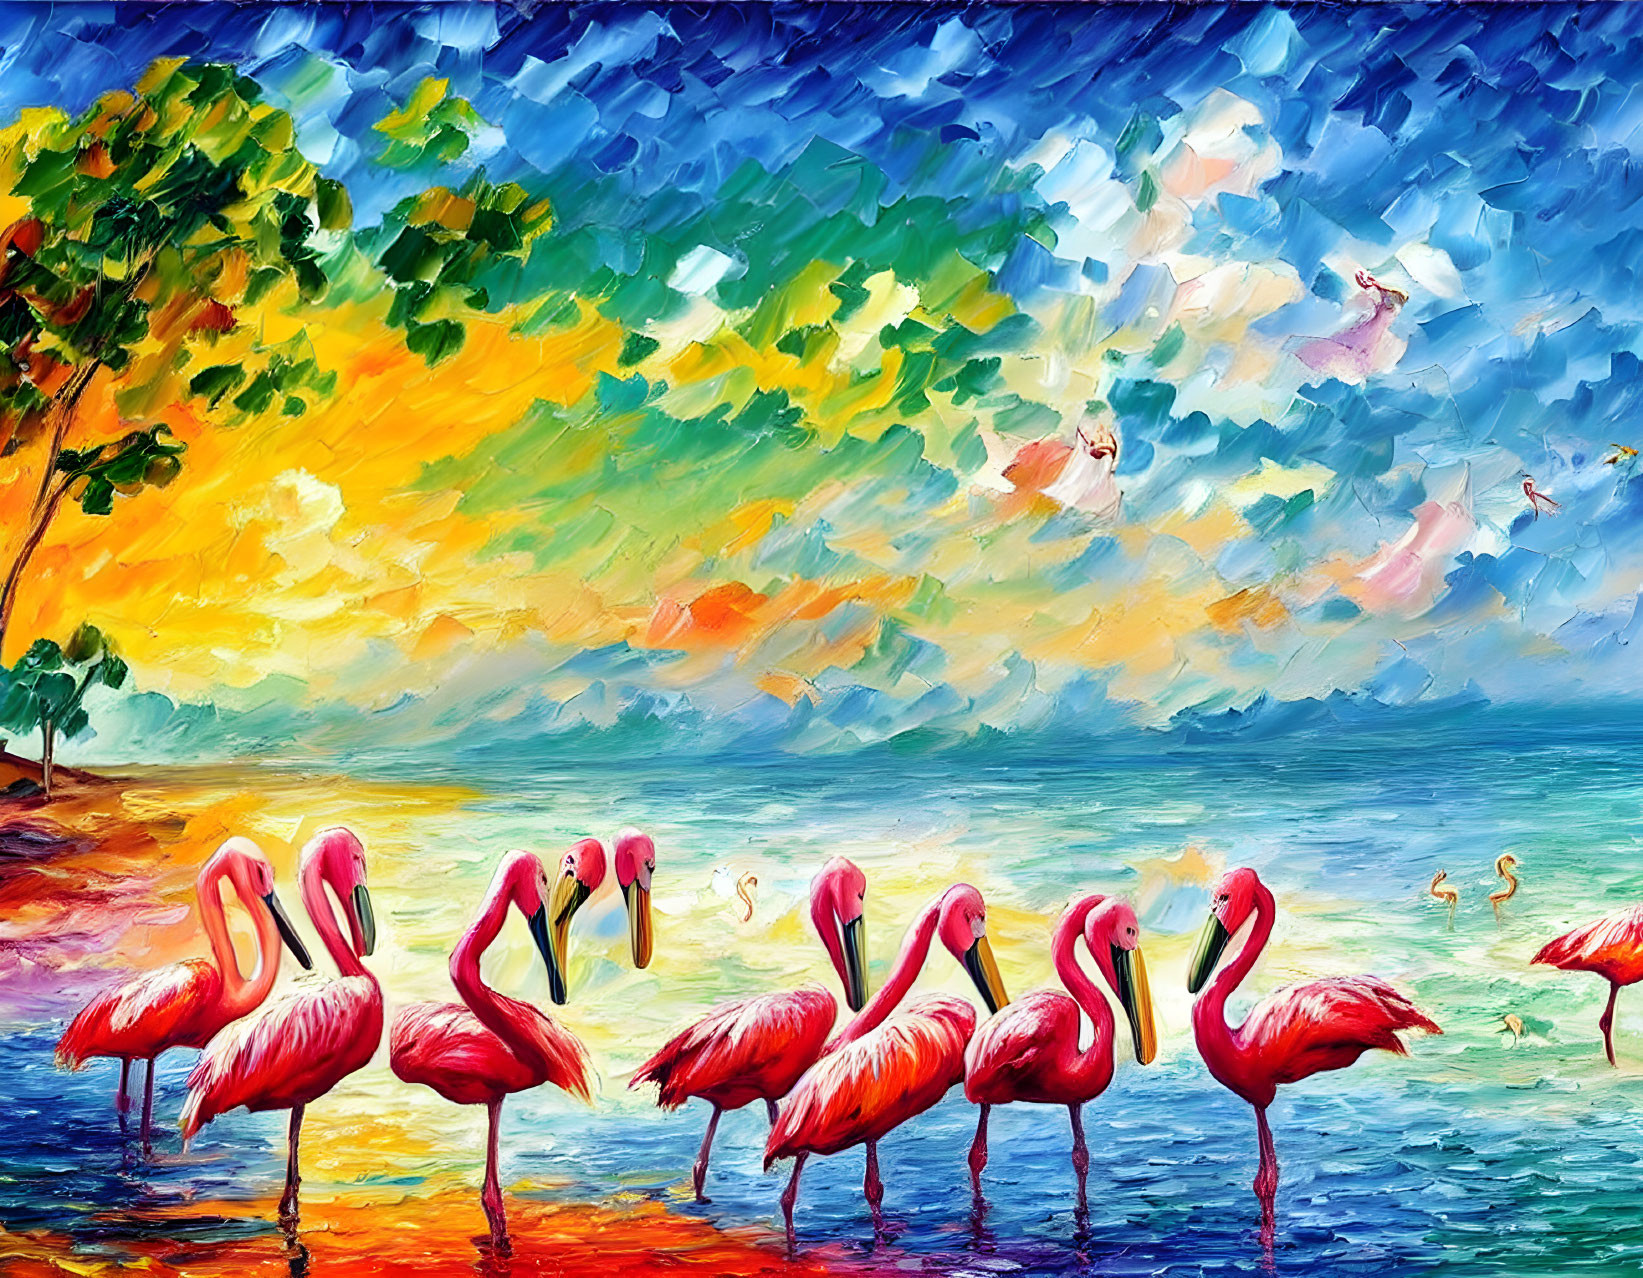 Colorful sunset painting featuring flamingos, trees, and birds by the seaside